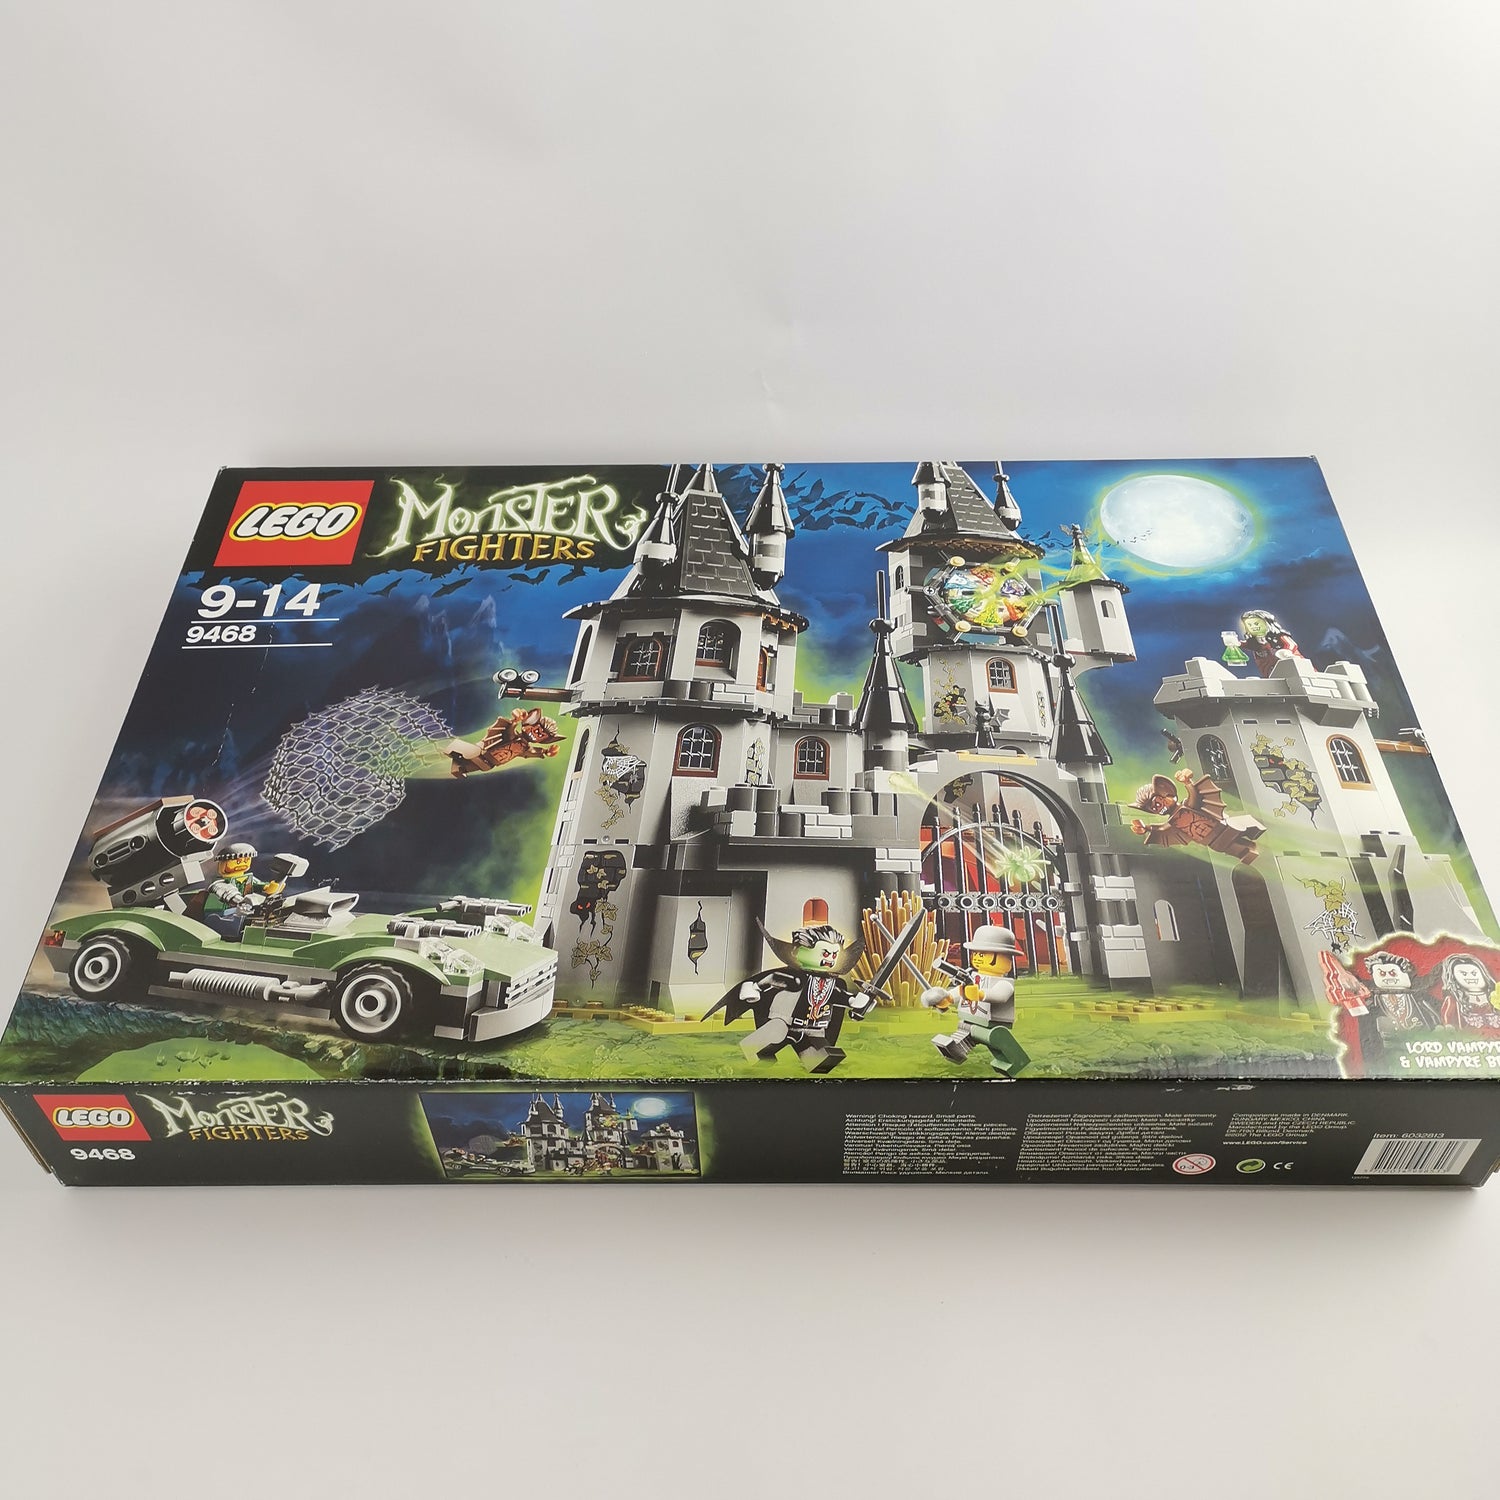 Lego Set 9468 (9-14 years): Monster Fighters Vampire Castle | Original packaging NEW NEW